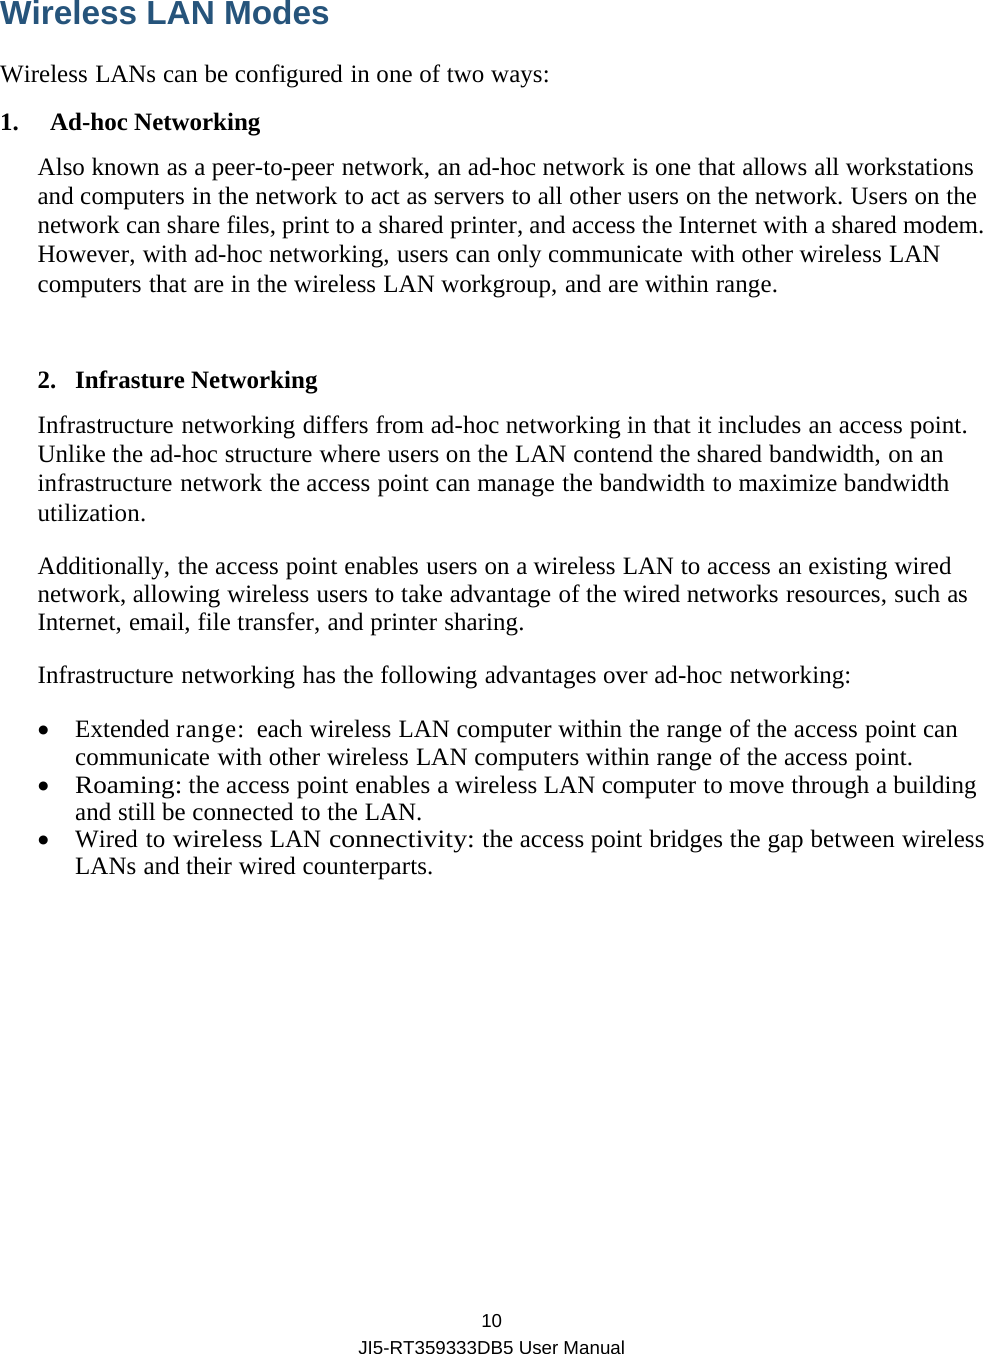  10 JI5-RT359333DB5 User Manual Wireless LAN Modes   Wireless LANs can be configured in one of two ways: 1. Ad-hoc Networking Also known as a peer-to-peer network, an ad-hoc network is one that allows all workstations and computers in the network to act as servers to all other users on the network. Users on the network can share files, print to a shared printer, and access the Internet with a shared modem. However, with ad-hoc networking, users can only communicate with other wireless LAN computers that are in the wireless LAN workgroup, and are within range.  2. Infrasture Networking Infrastructure networking differs from ad-hoc networking in that it includes an access point. Unlike the ad-hoc structure where users on the LAN contend the shared bandwidth, on an infrastructure network the access point can manage the bandwidth to maximize bandwidth utilization. Additionally, the access point enables users on a wireless LAN to access an existing wired network, allowing wireless users to take advantage of the wired networks resources, such as Internet, email, file transfer, and printer sharing. Infrastructure networking has the following advantages over ad-hoc networking:  Extended range:  each wireless LAN computer within the range of the access point can communicate with other wireless LAN computers within range of the access point.  Roaming: the access point enables a wireless LAN computer to move through a building and still be connected to the LAN.  Wired to wireless LAN connectivity: the access point bridges the gap between wireless LANs and their wired counterparts.       